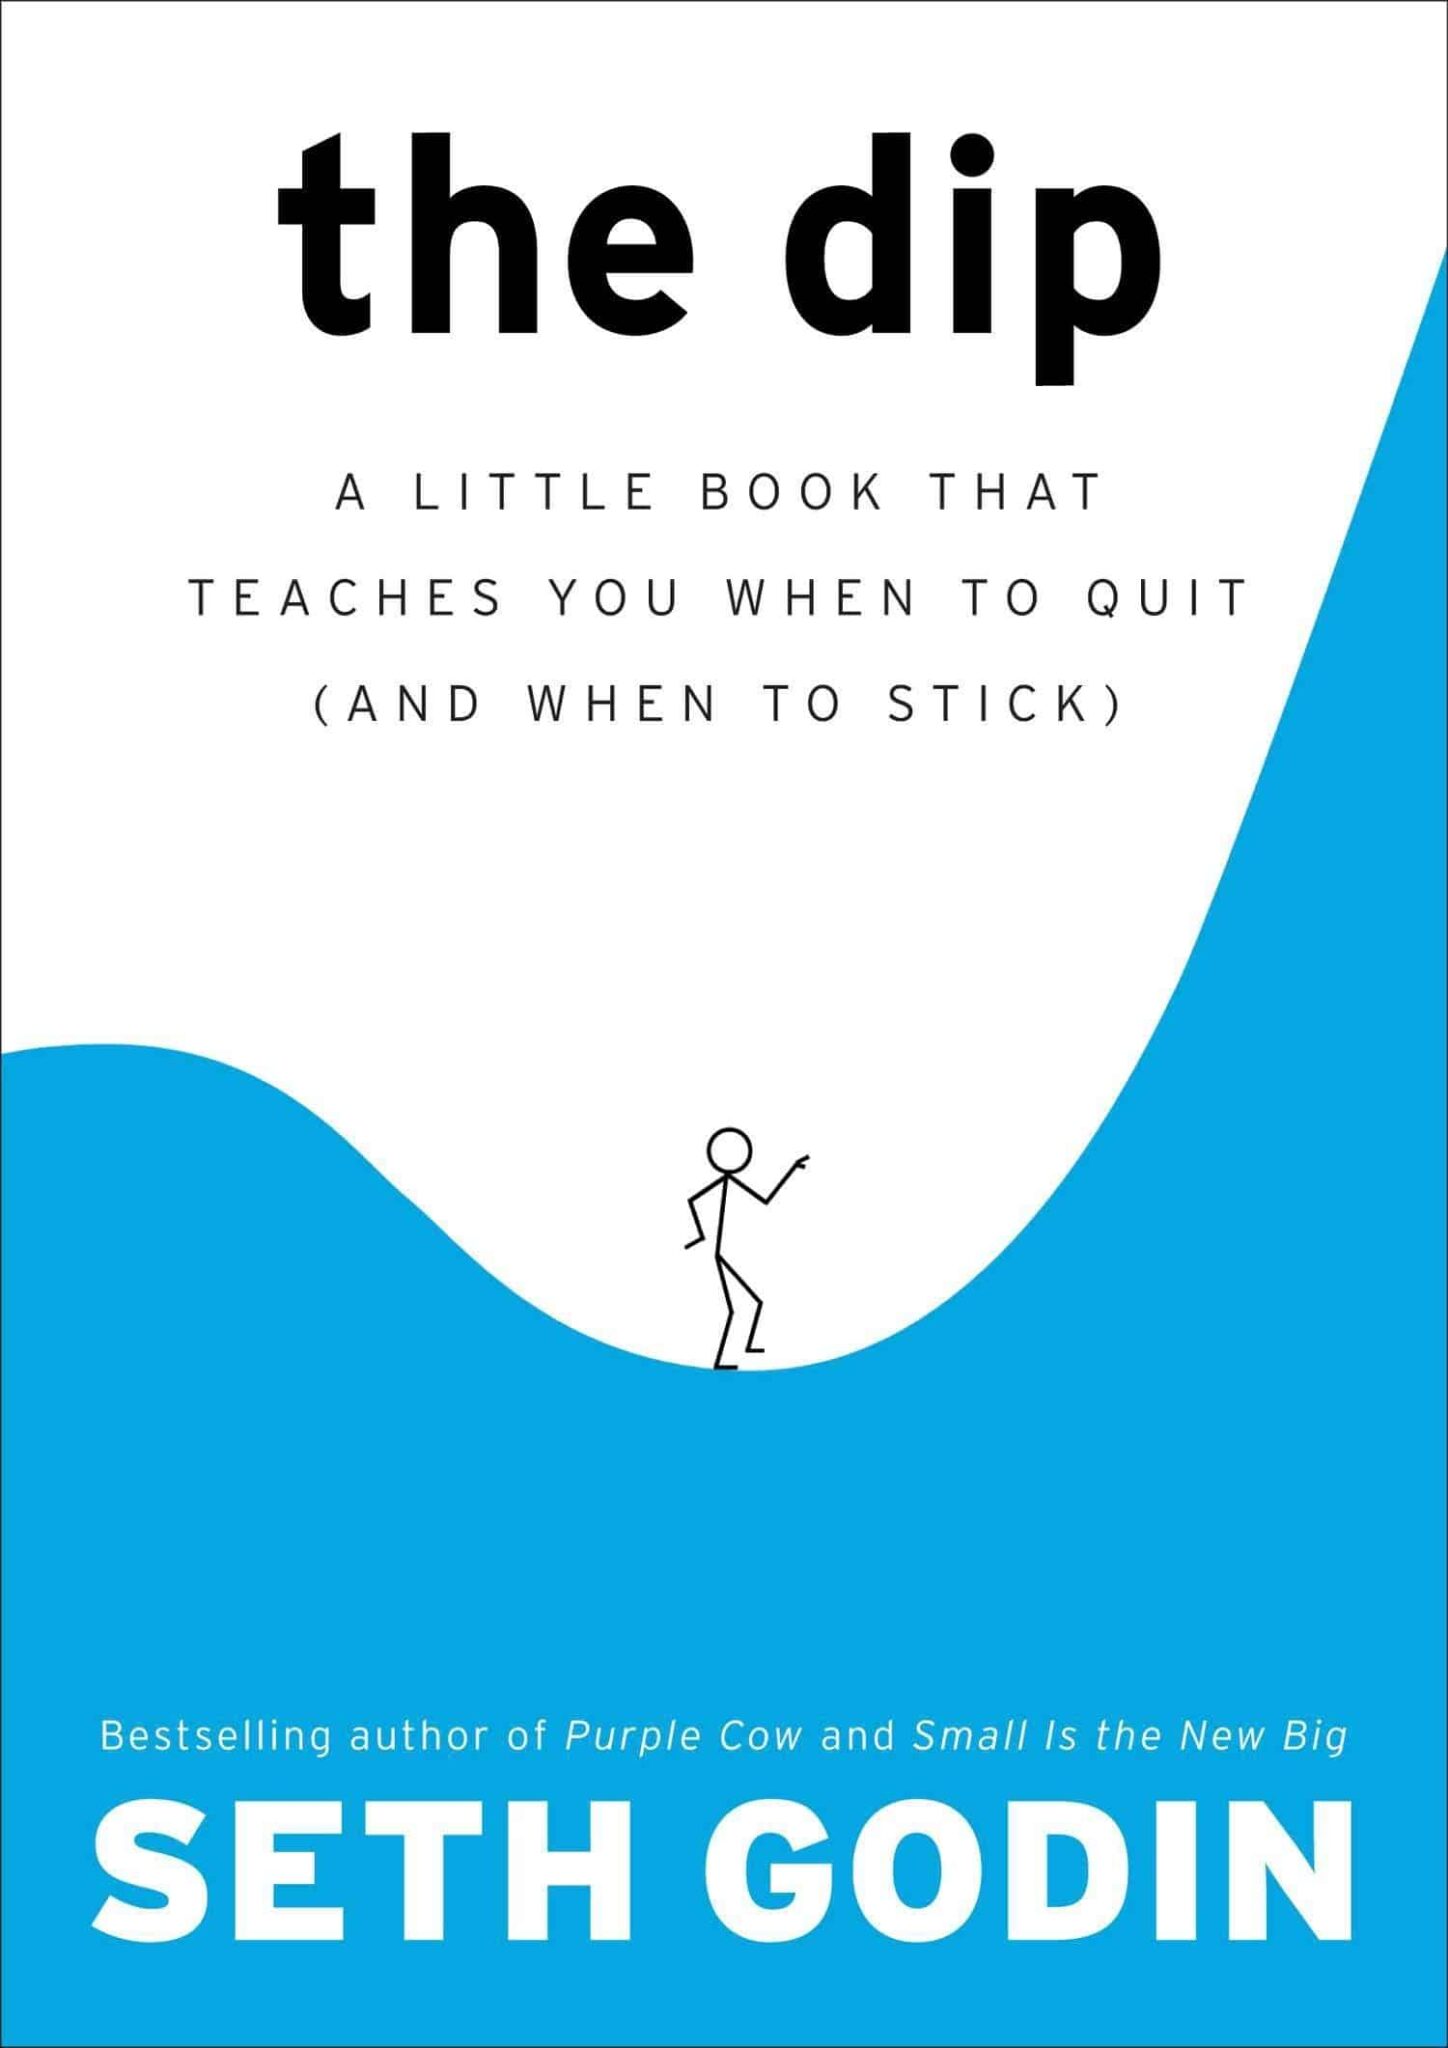 the dip book cover of a stick figure man on a blue wave